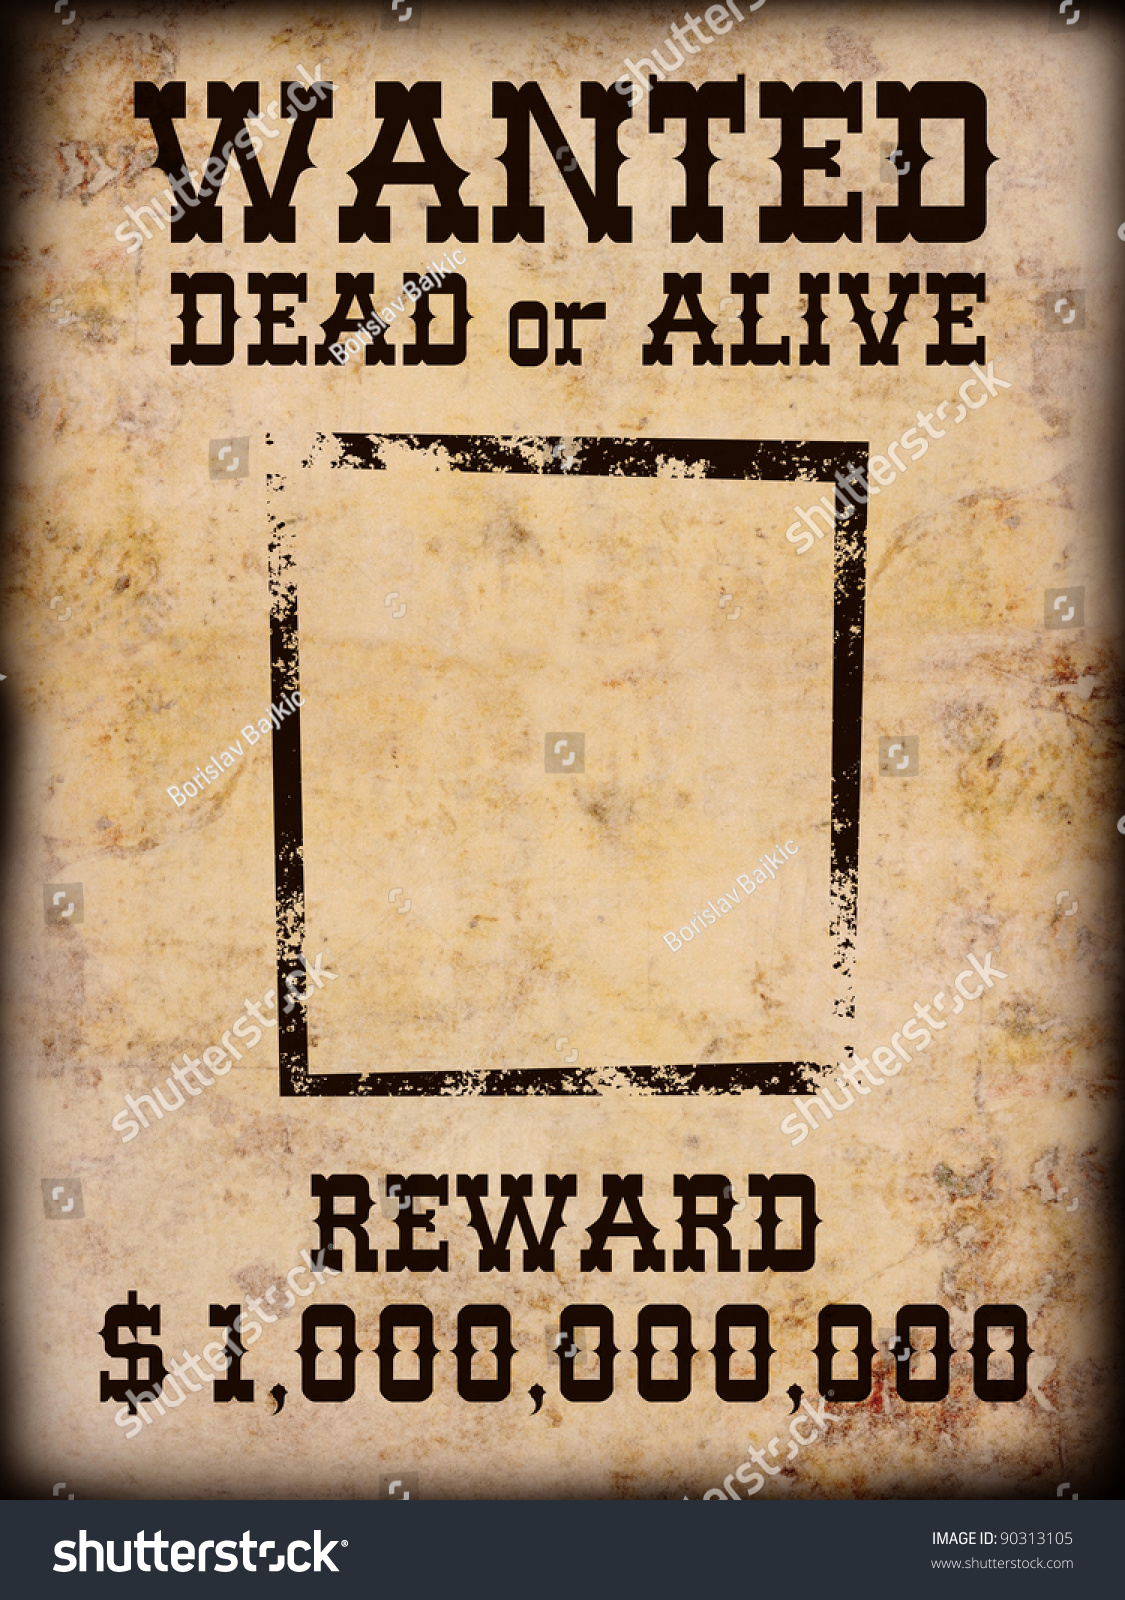 Poster Wanted Dead Alive Stock Photo 90313105 - Shutterstock